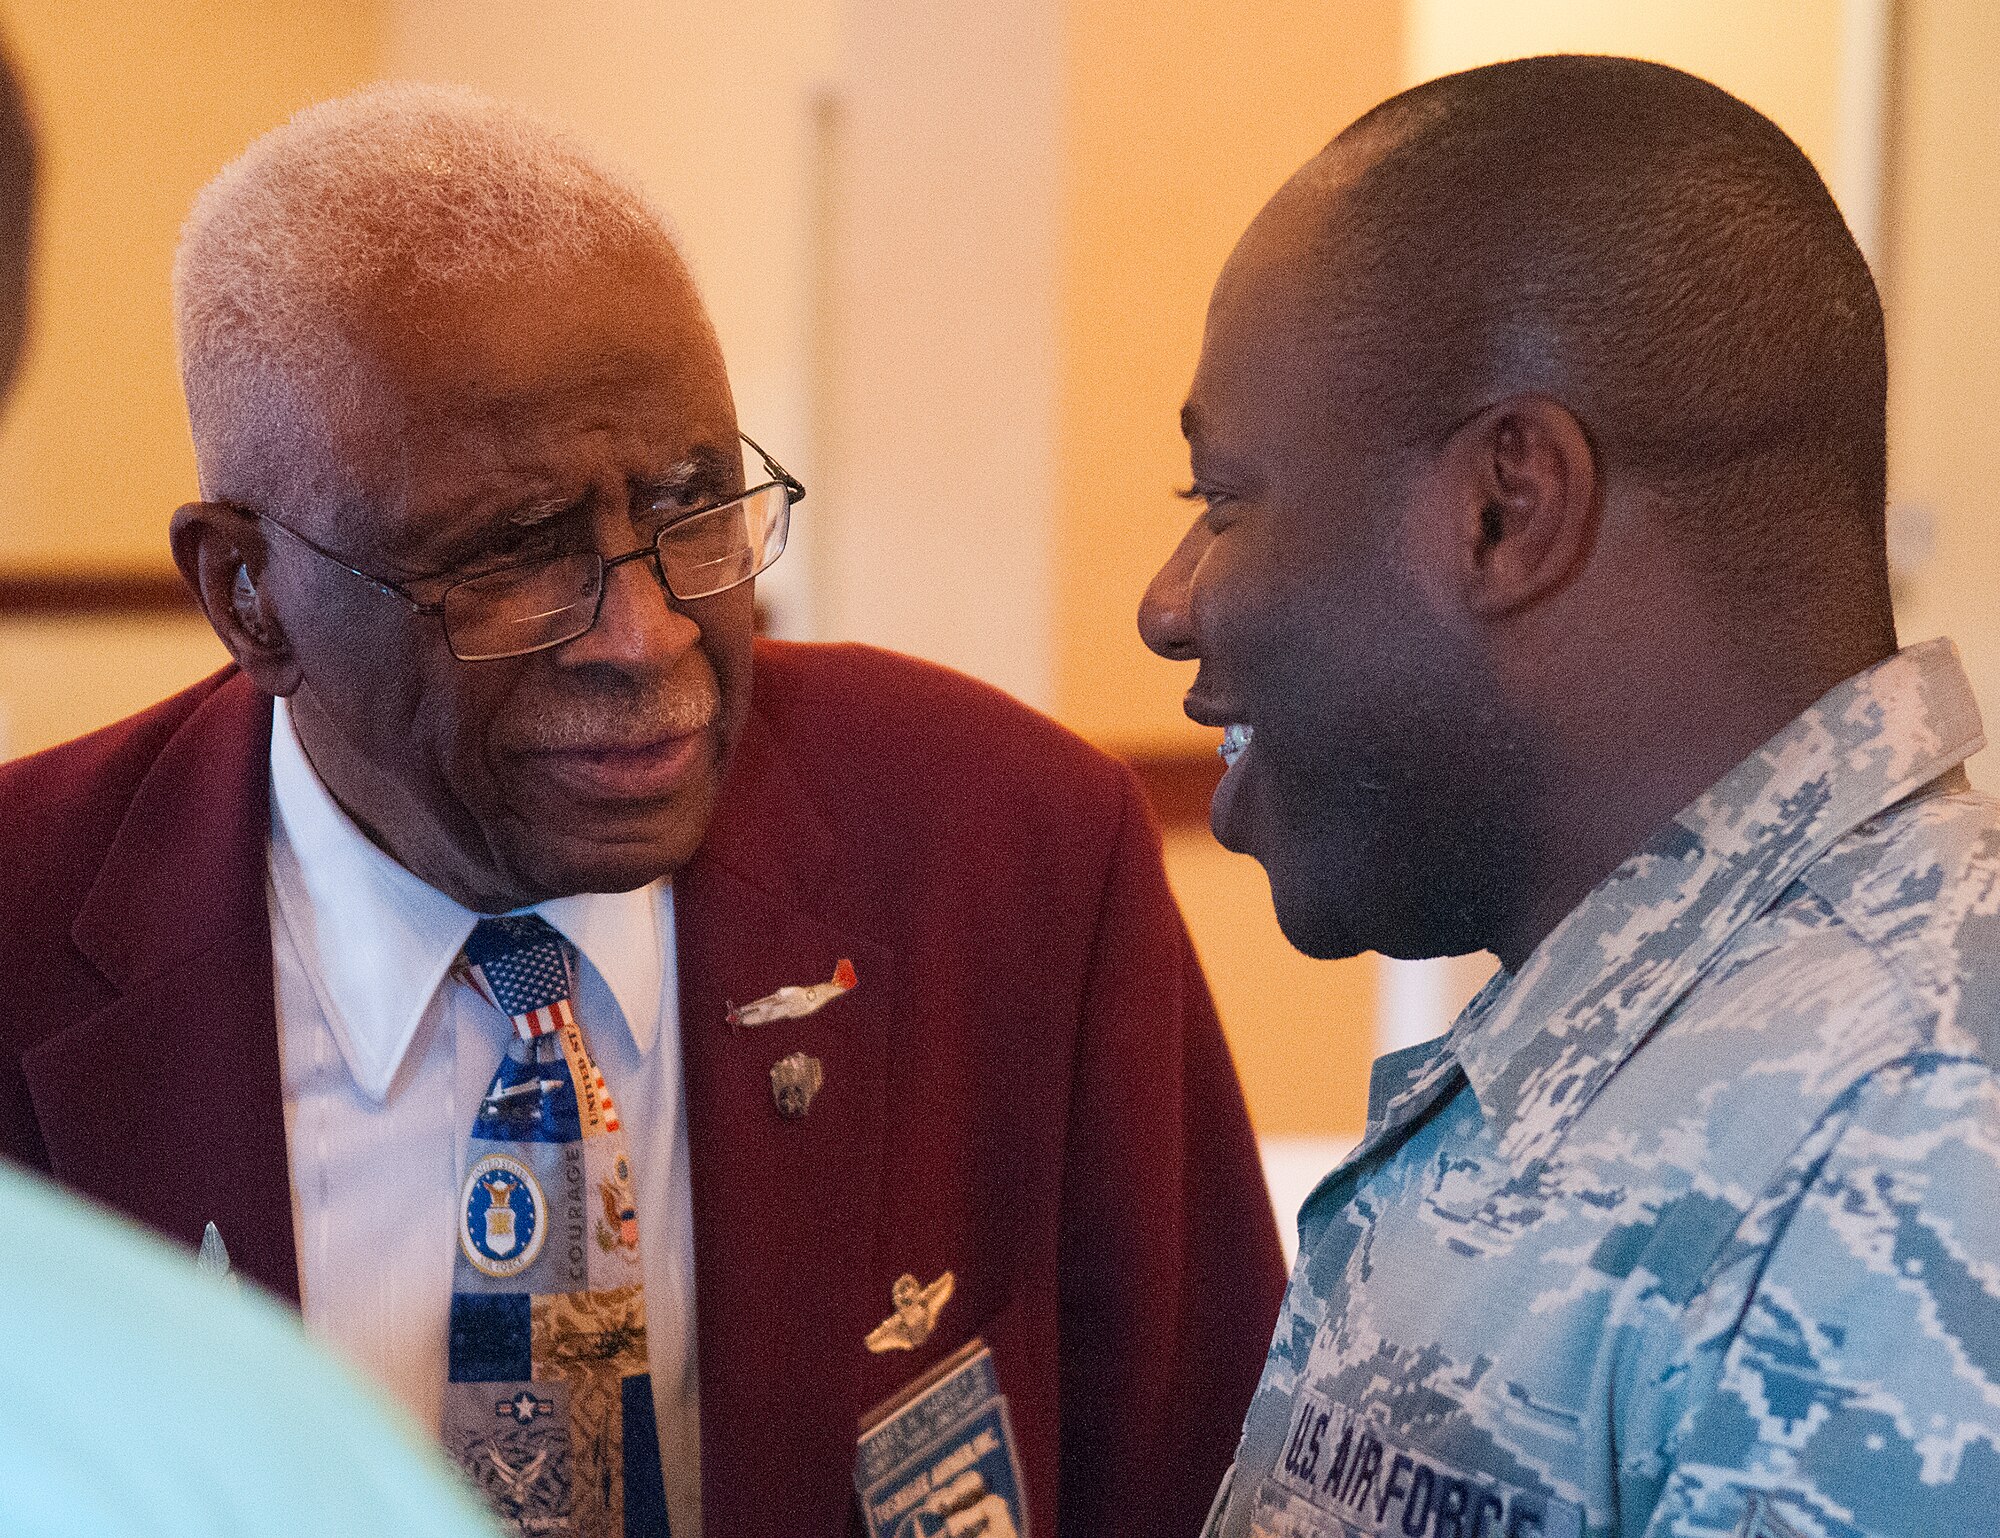 Retired Lt. Col. James Harvey III, one of the original Tuskegee pilots, speaks with Senior Airman Aaron Snow, 153rd Comptroller Squadron, during a reception in honor of the Tuskegee Airmen at the Historic Plains Hotel, Cheyenne, Wyo., August 14, 2015. Harvey and Snow discussed the difference in their careers in the military and how many opportunities there are for people of any race in today's Air Force. (U.S. Air Force photo by Airman 1st Class Brandon Valle)